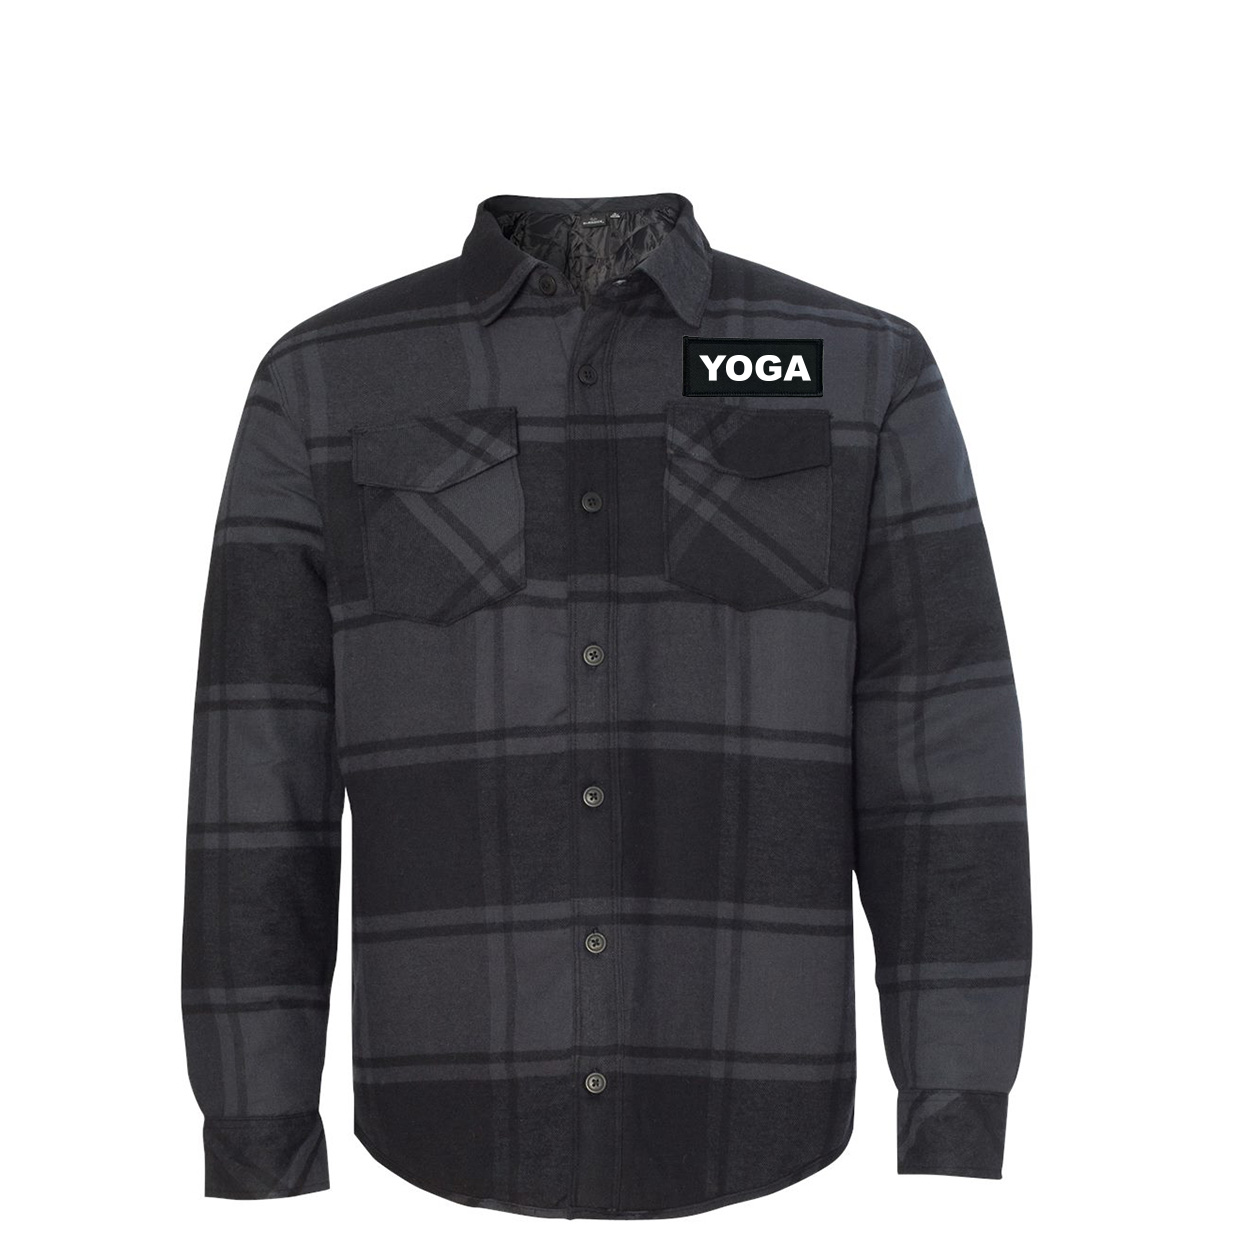 Yoga Brand Logo Classic Unisex Woven Patch Quilted Button Flannel Jacket Black/Plaid (White Logo)